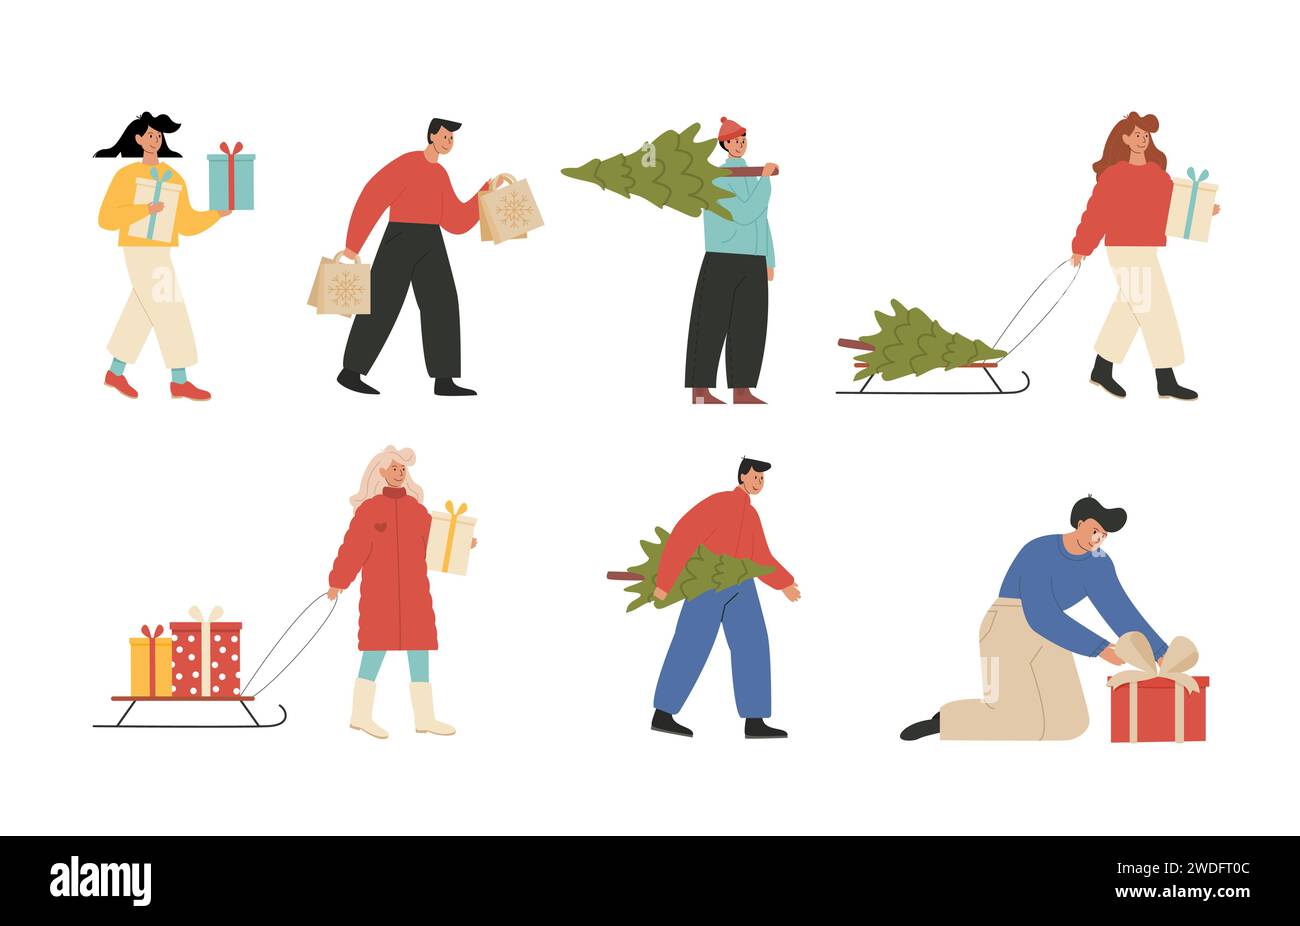 Bundle of people preparing for and celebrating winter holidays. Men and women carrying Christmas tree, walking with presents, receiving gifts, doing s Stock Vector